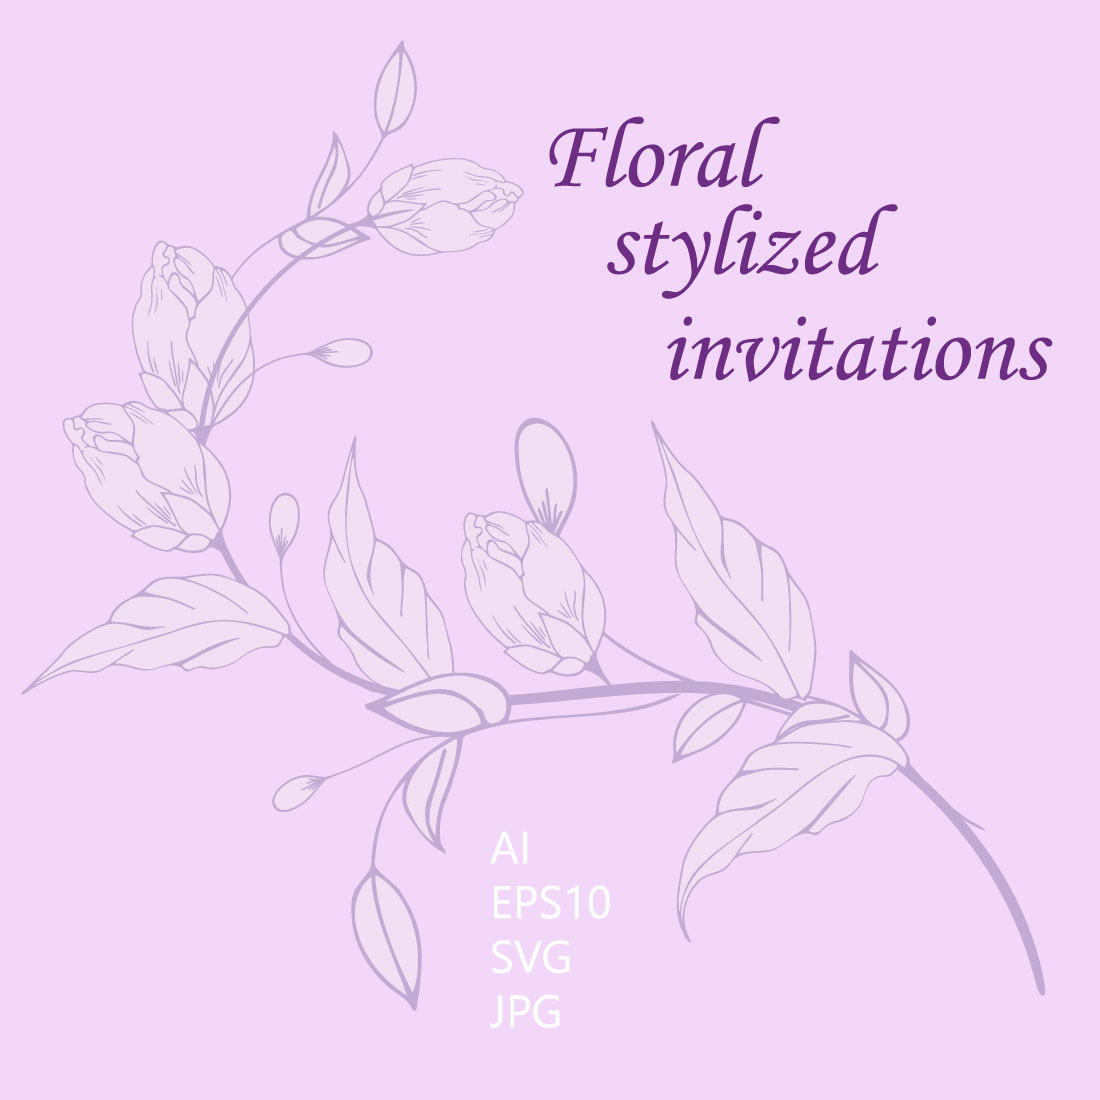 Floral stylized invitations cover image.